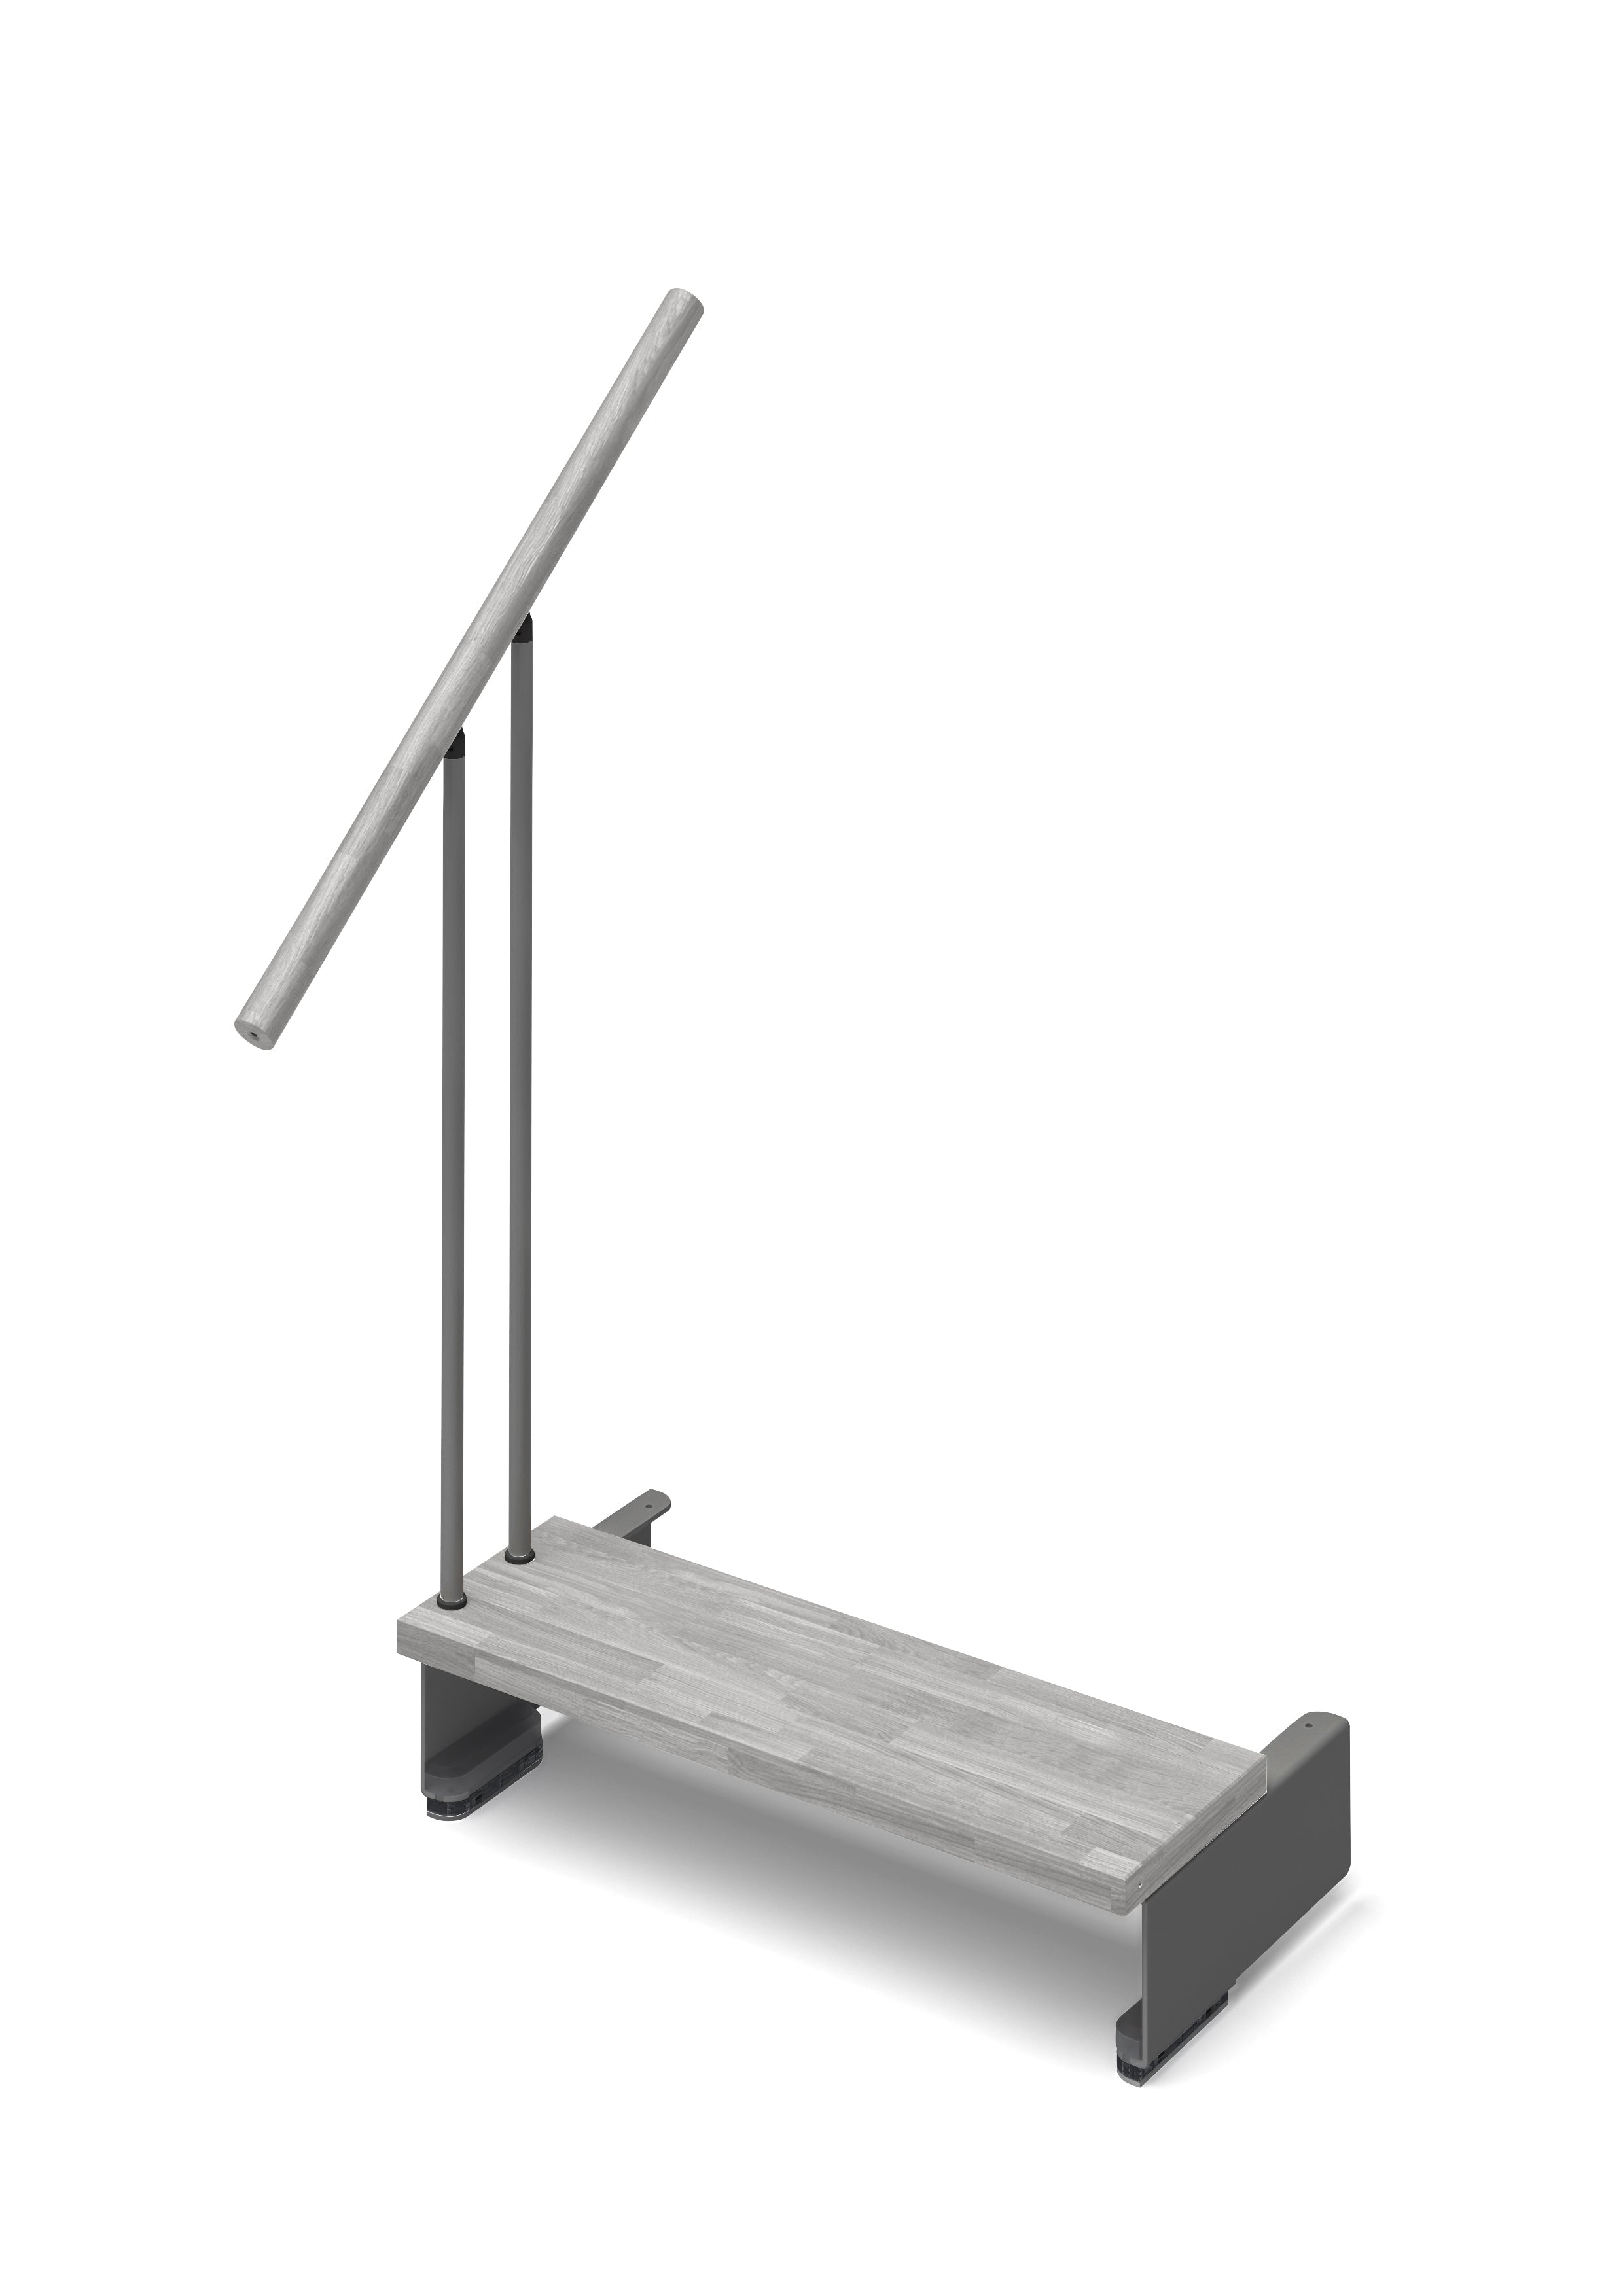 Additional step Adapta 74cm (with structure and railing) - Cement 89